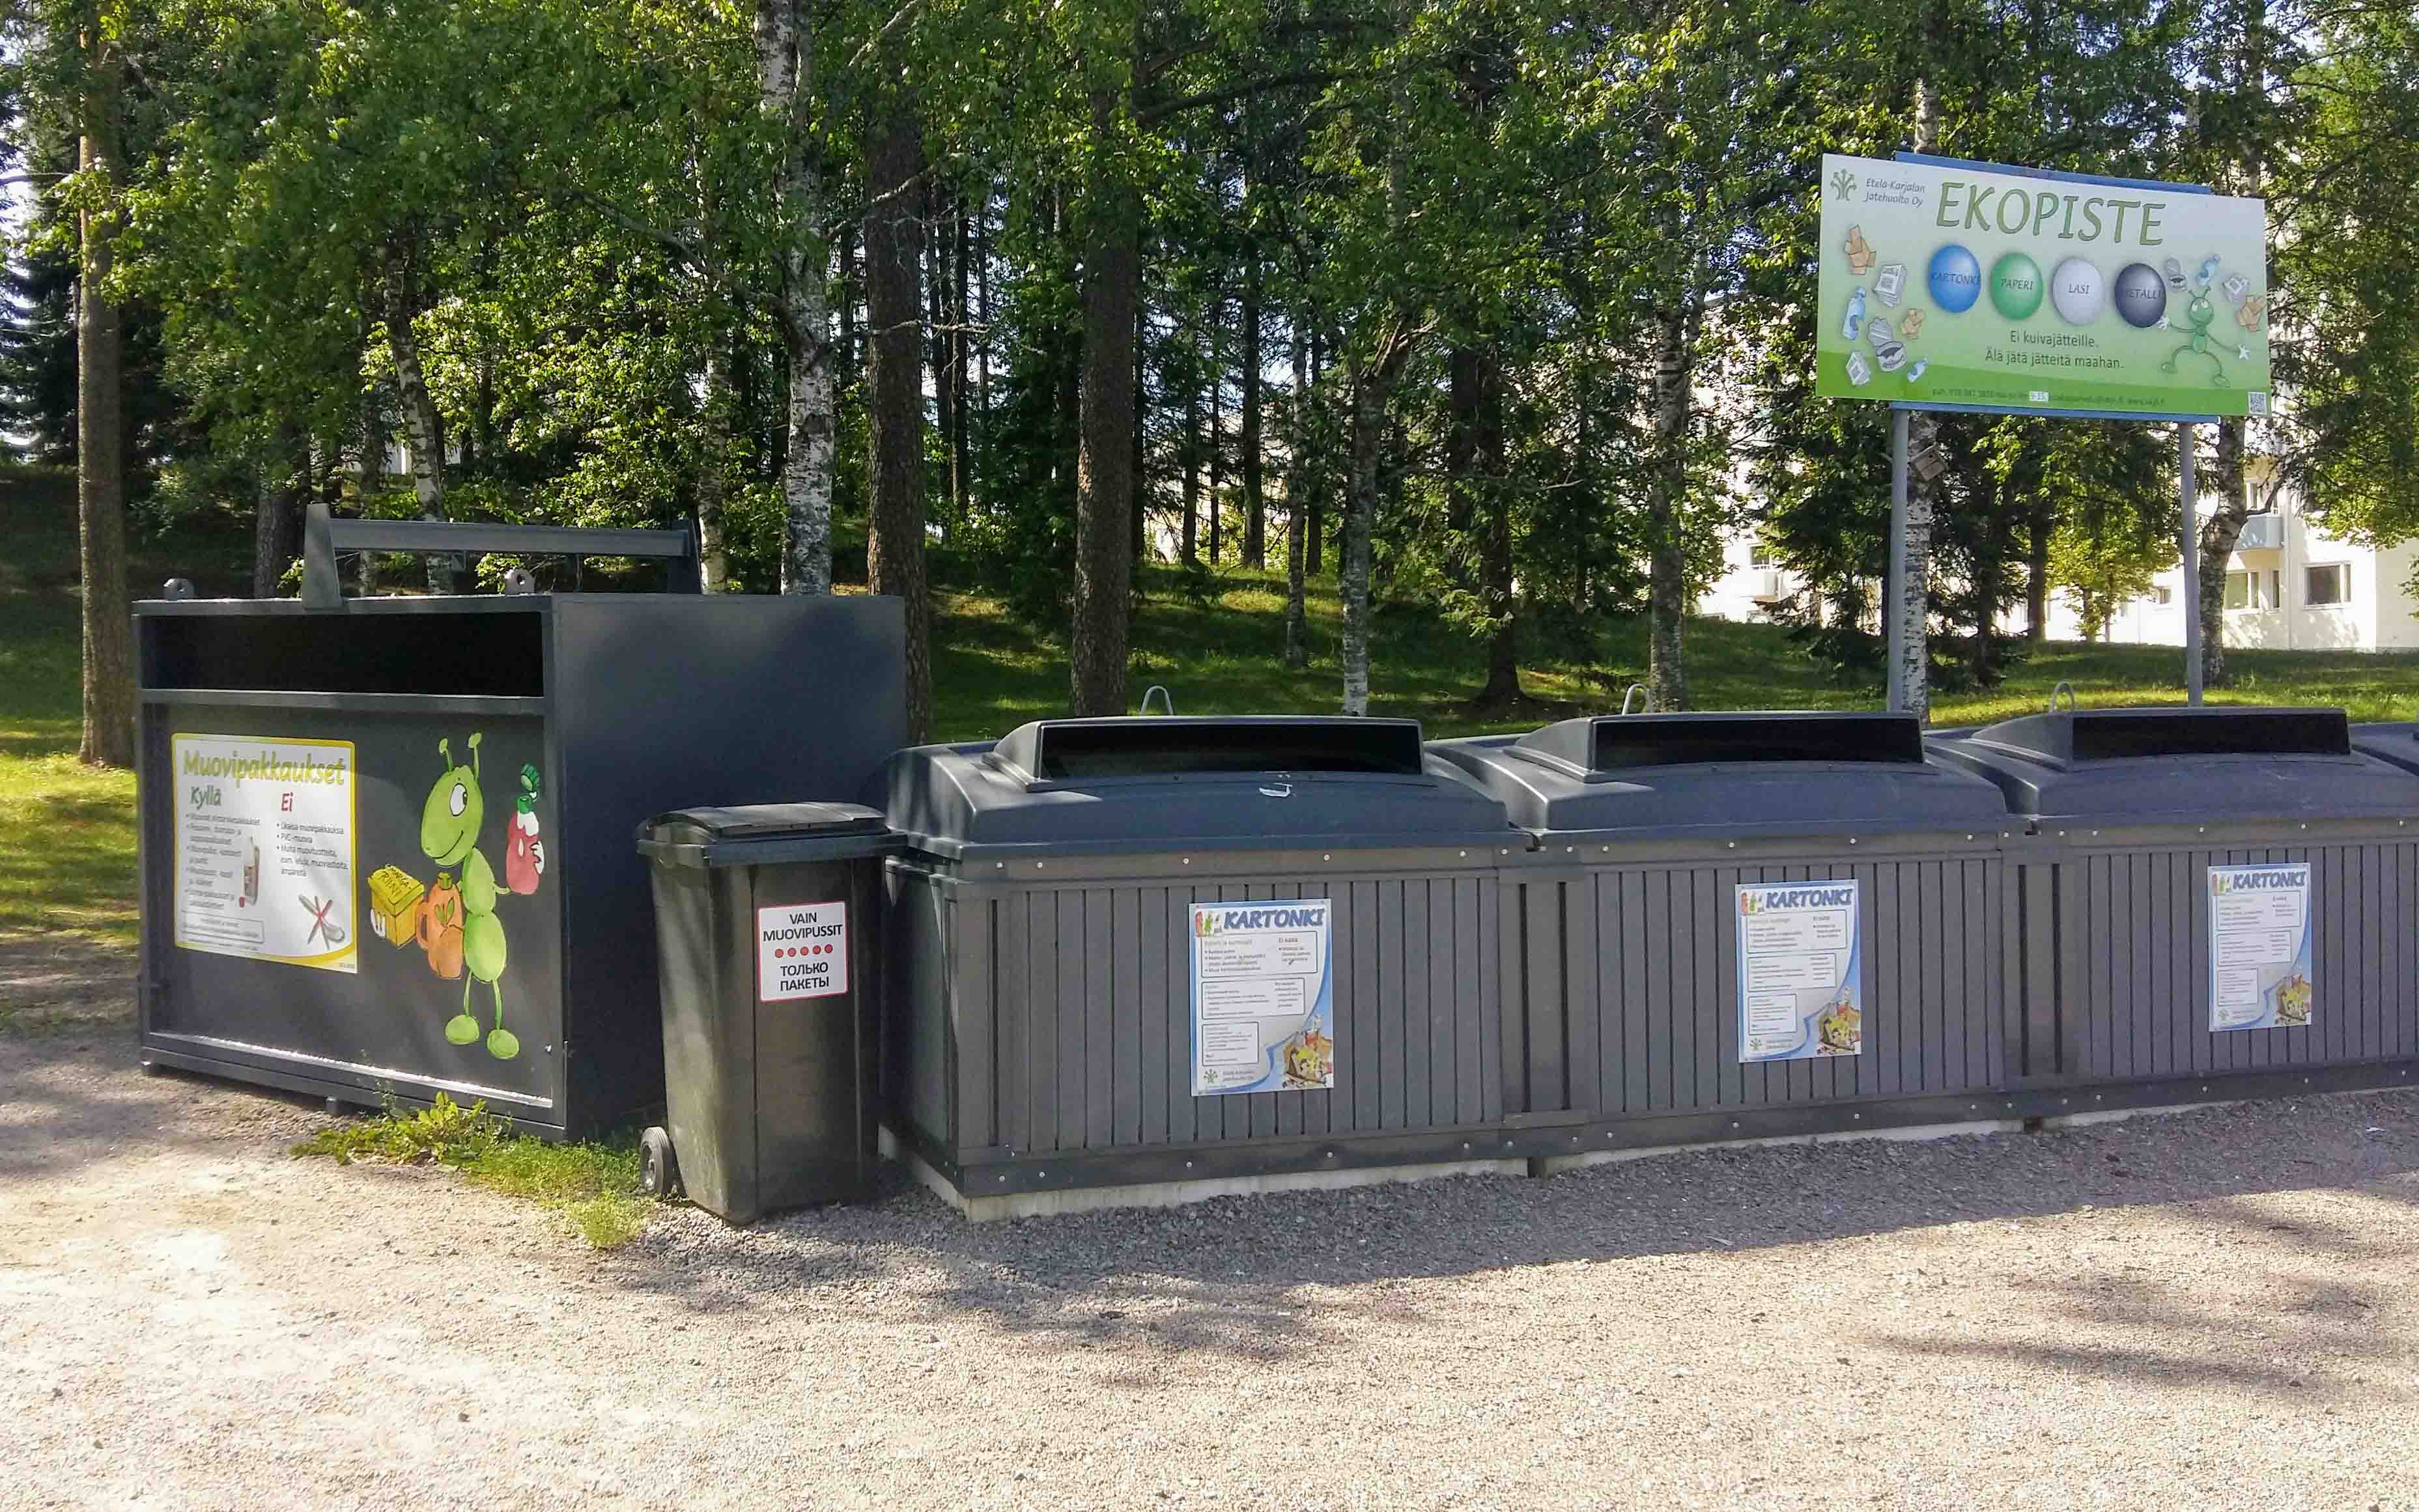 A recycling point.